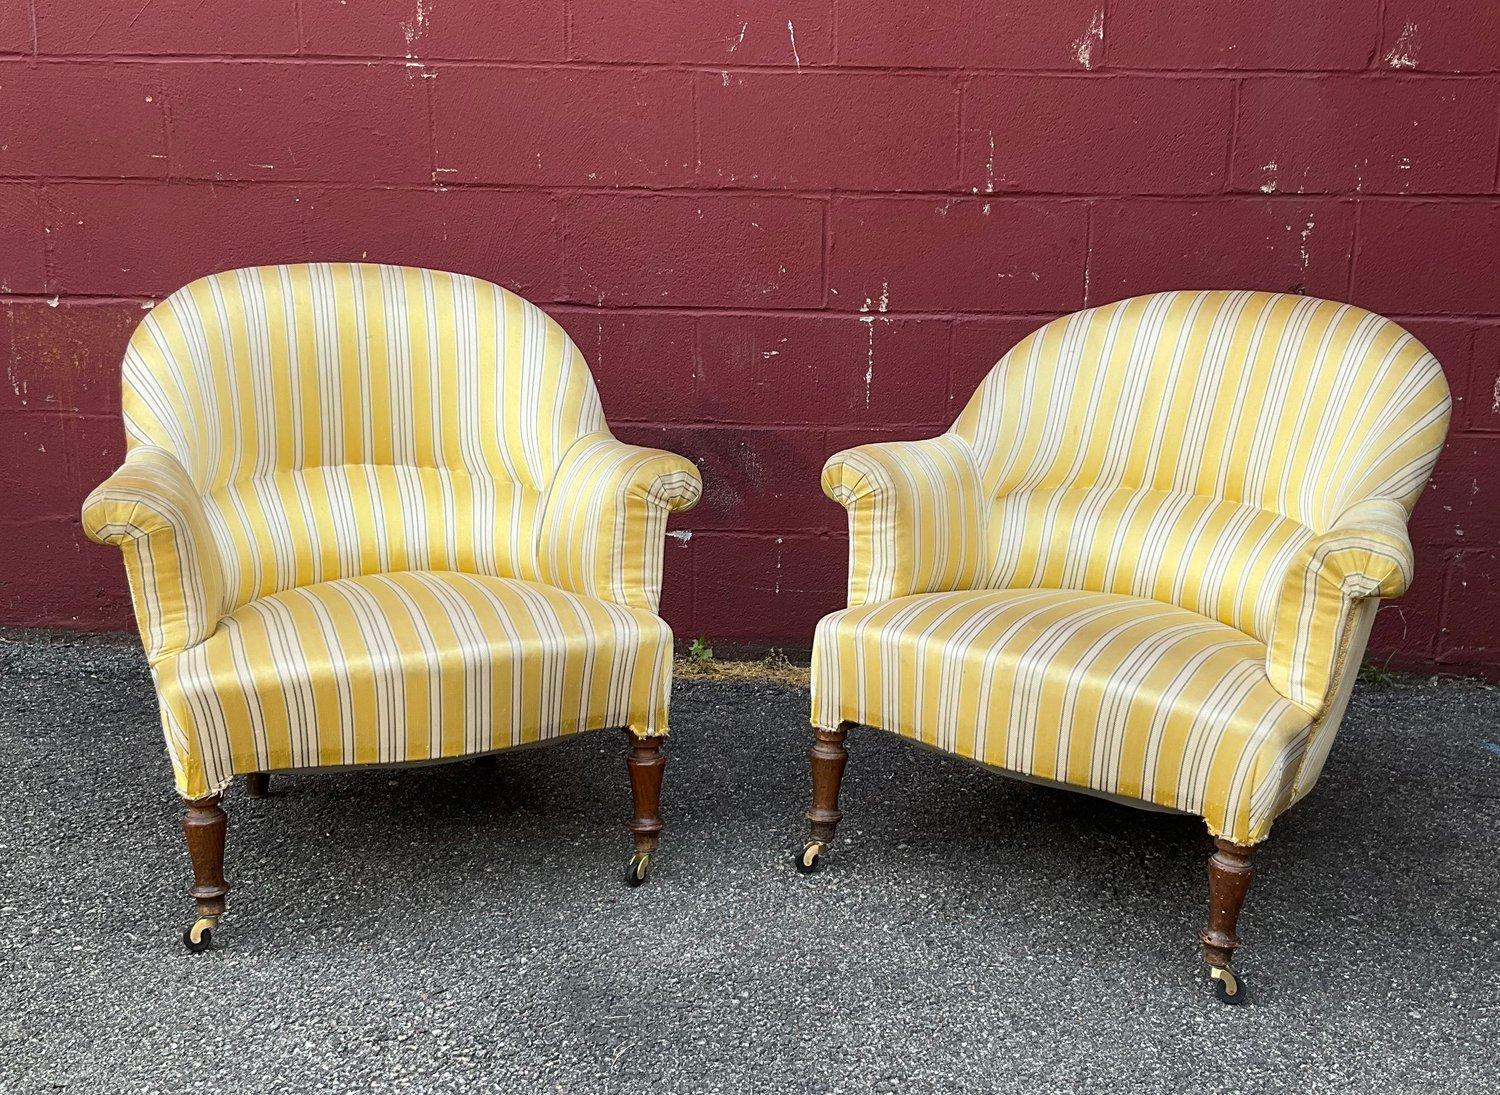 A very comfortable pair of French Napoleon III armchairs from the late 19th century. These chairs bring dimension and style to all settings - traditional or modern. Not only are the chairs elegant and stylish, they are very comfortable as well. You